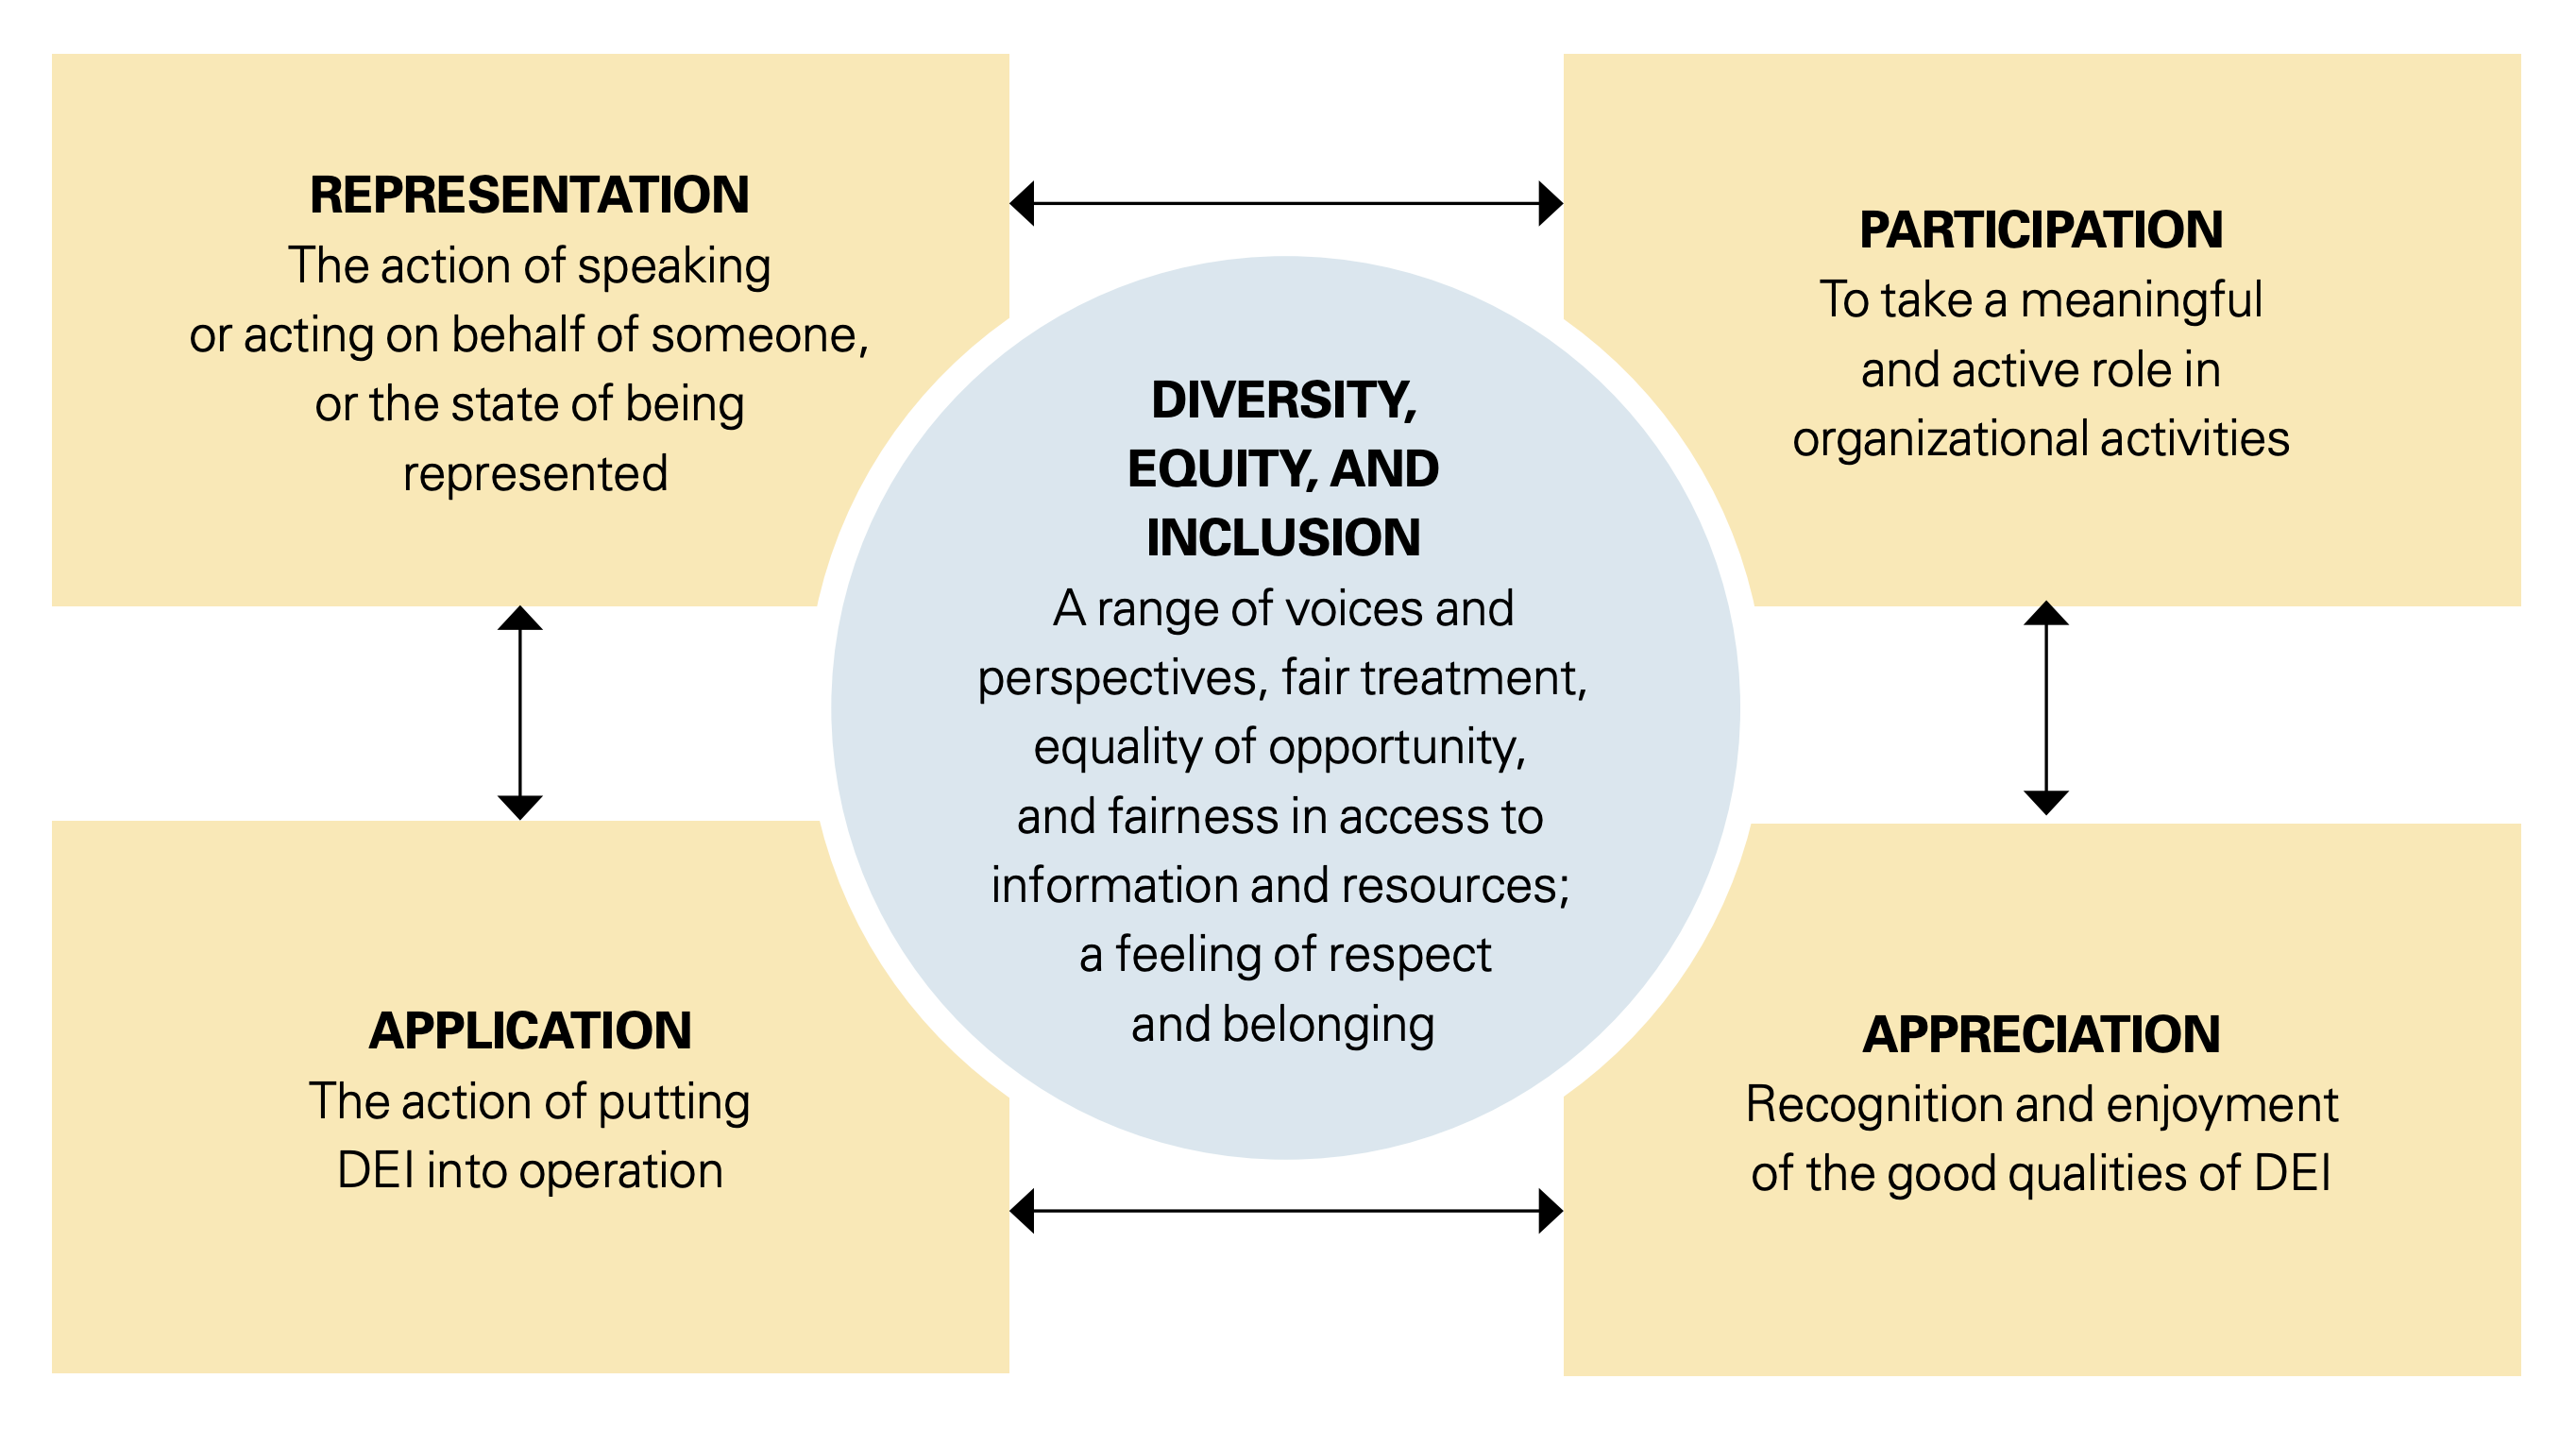 Four Core Values of Diversity, Equity, and Inclusion